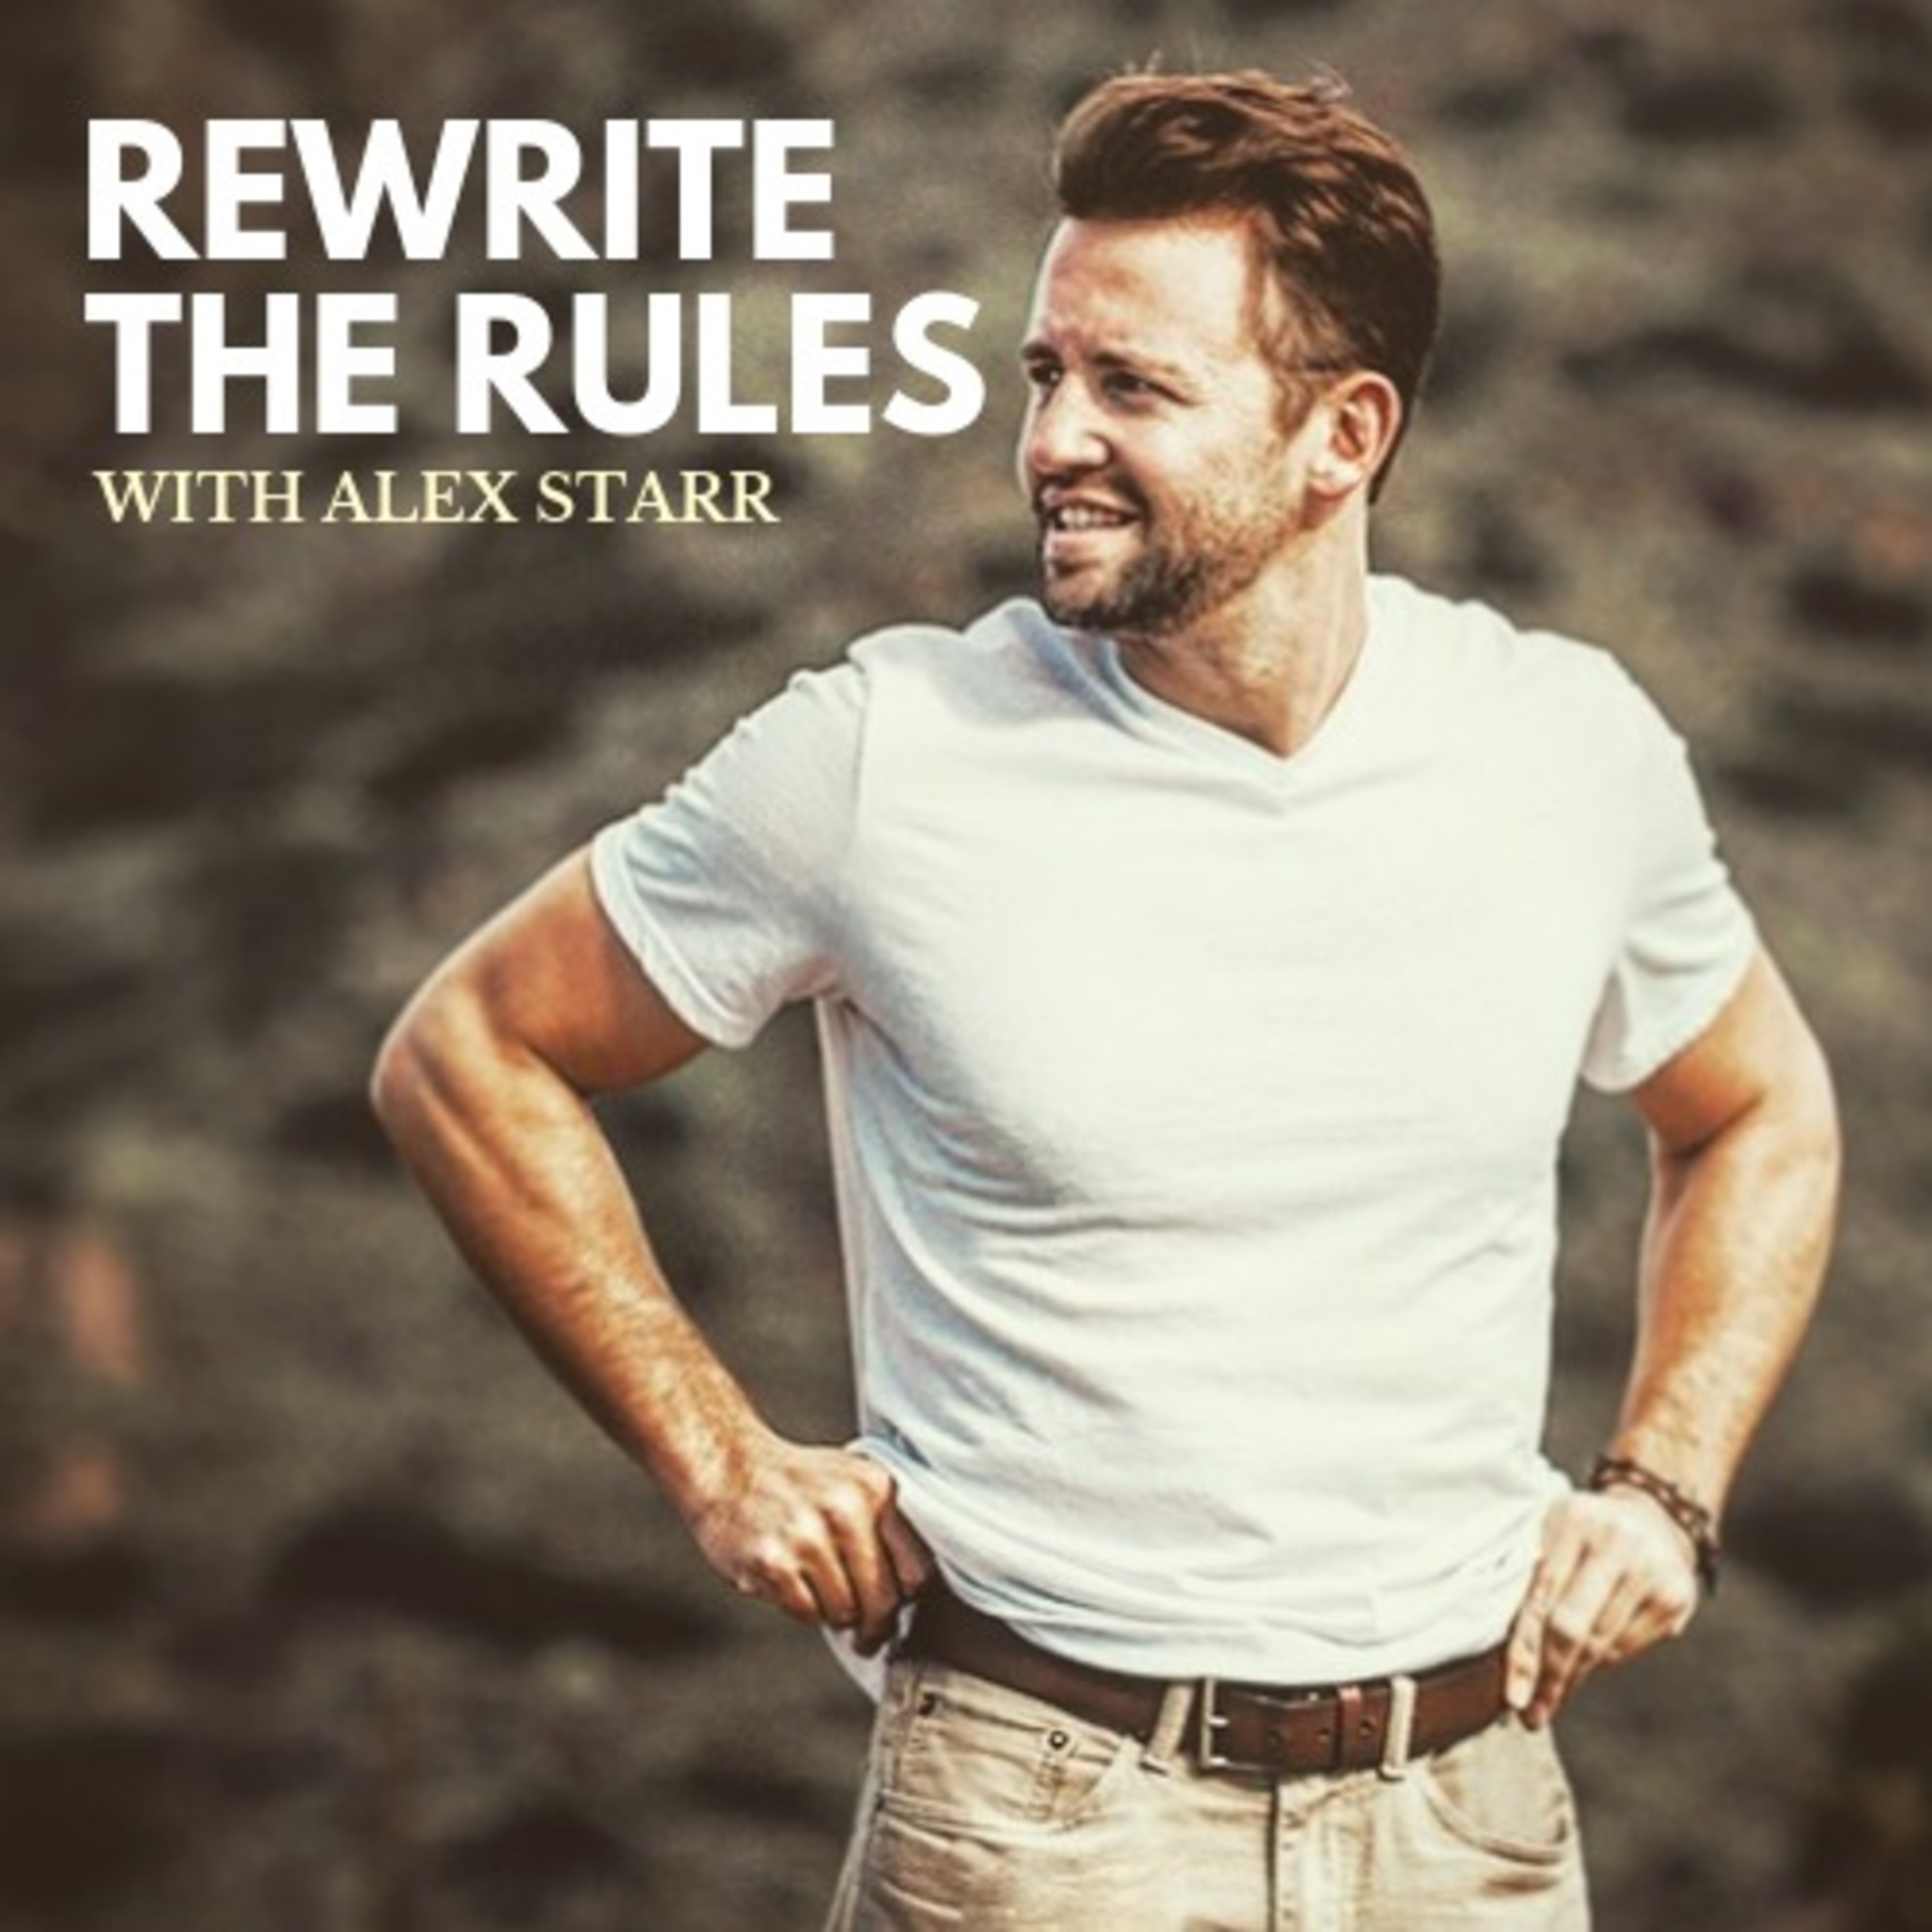 Rewrite the Rules with Alex Starr Listen via Stitcher for Podcasts